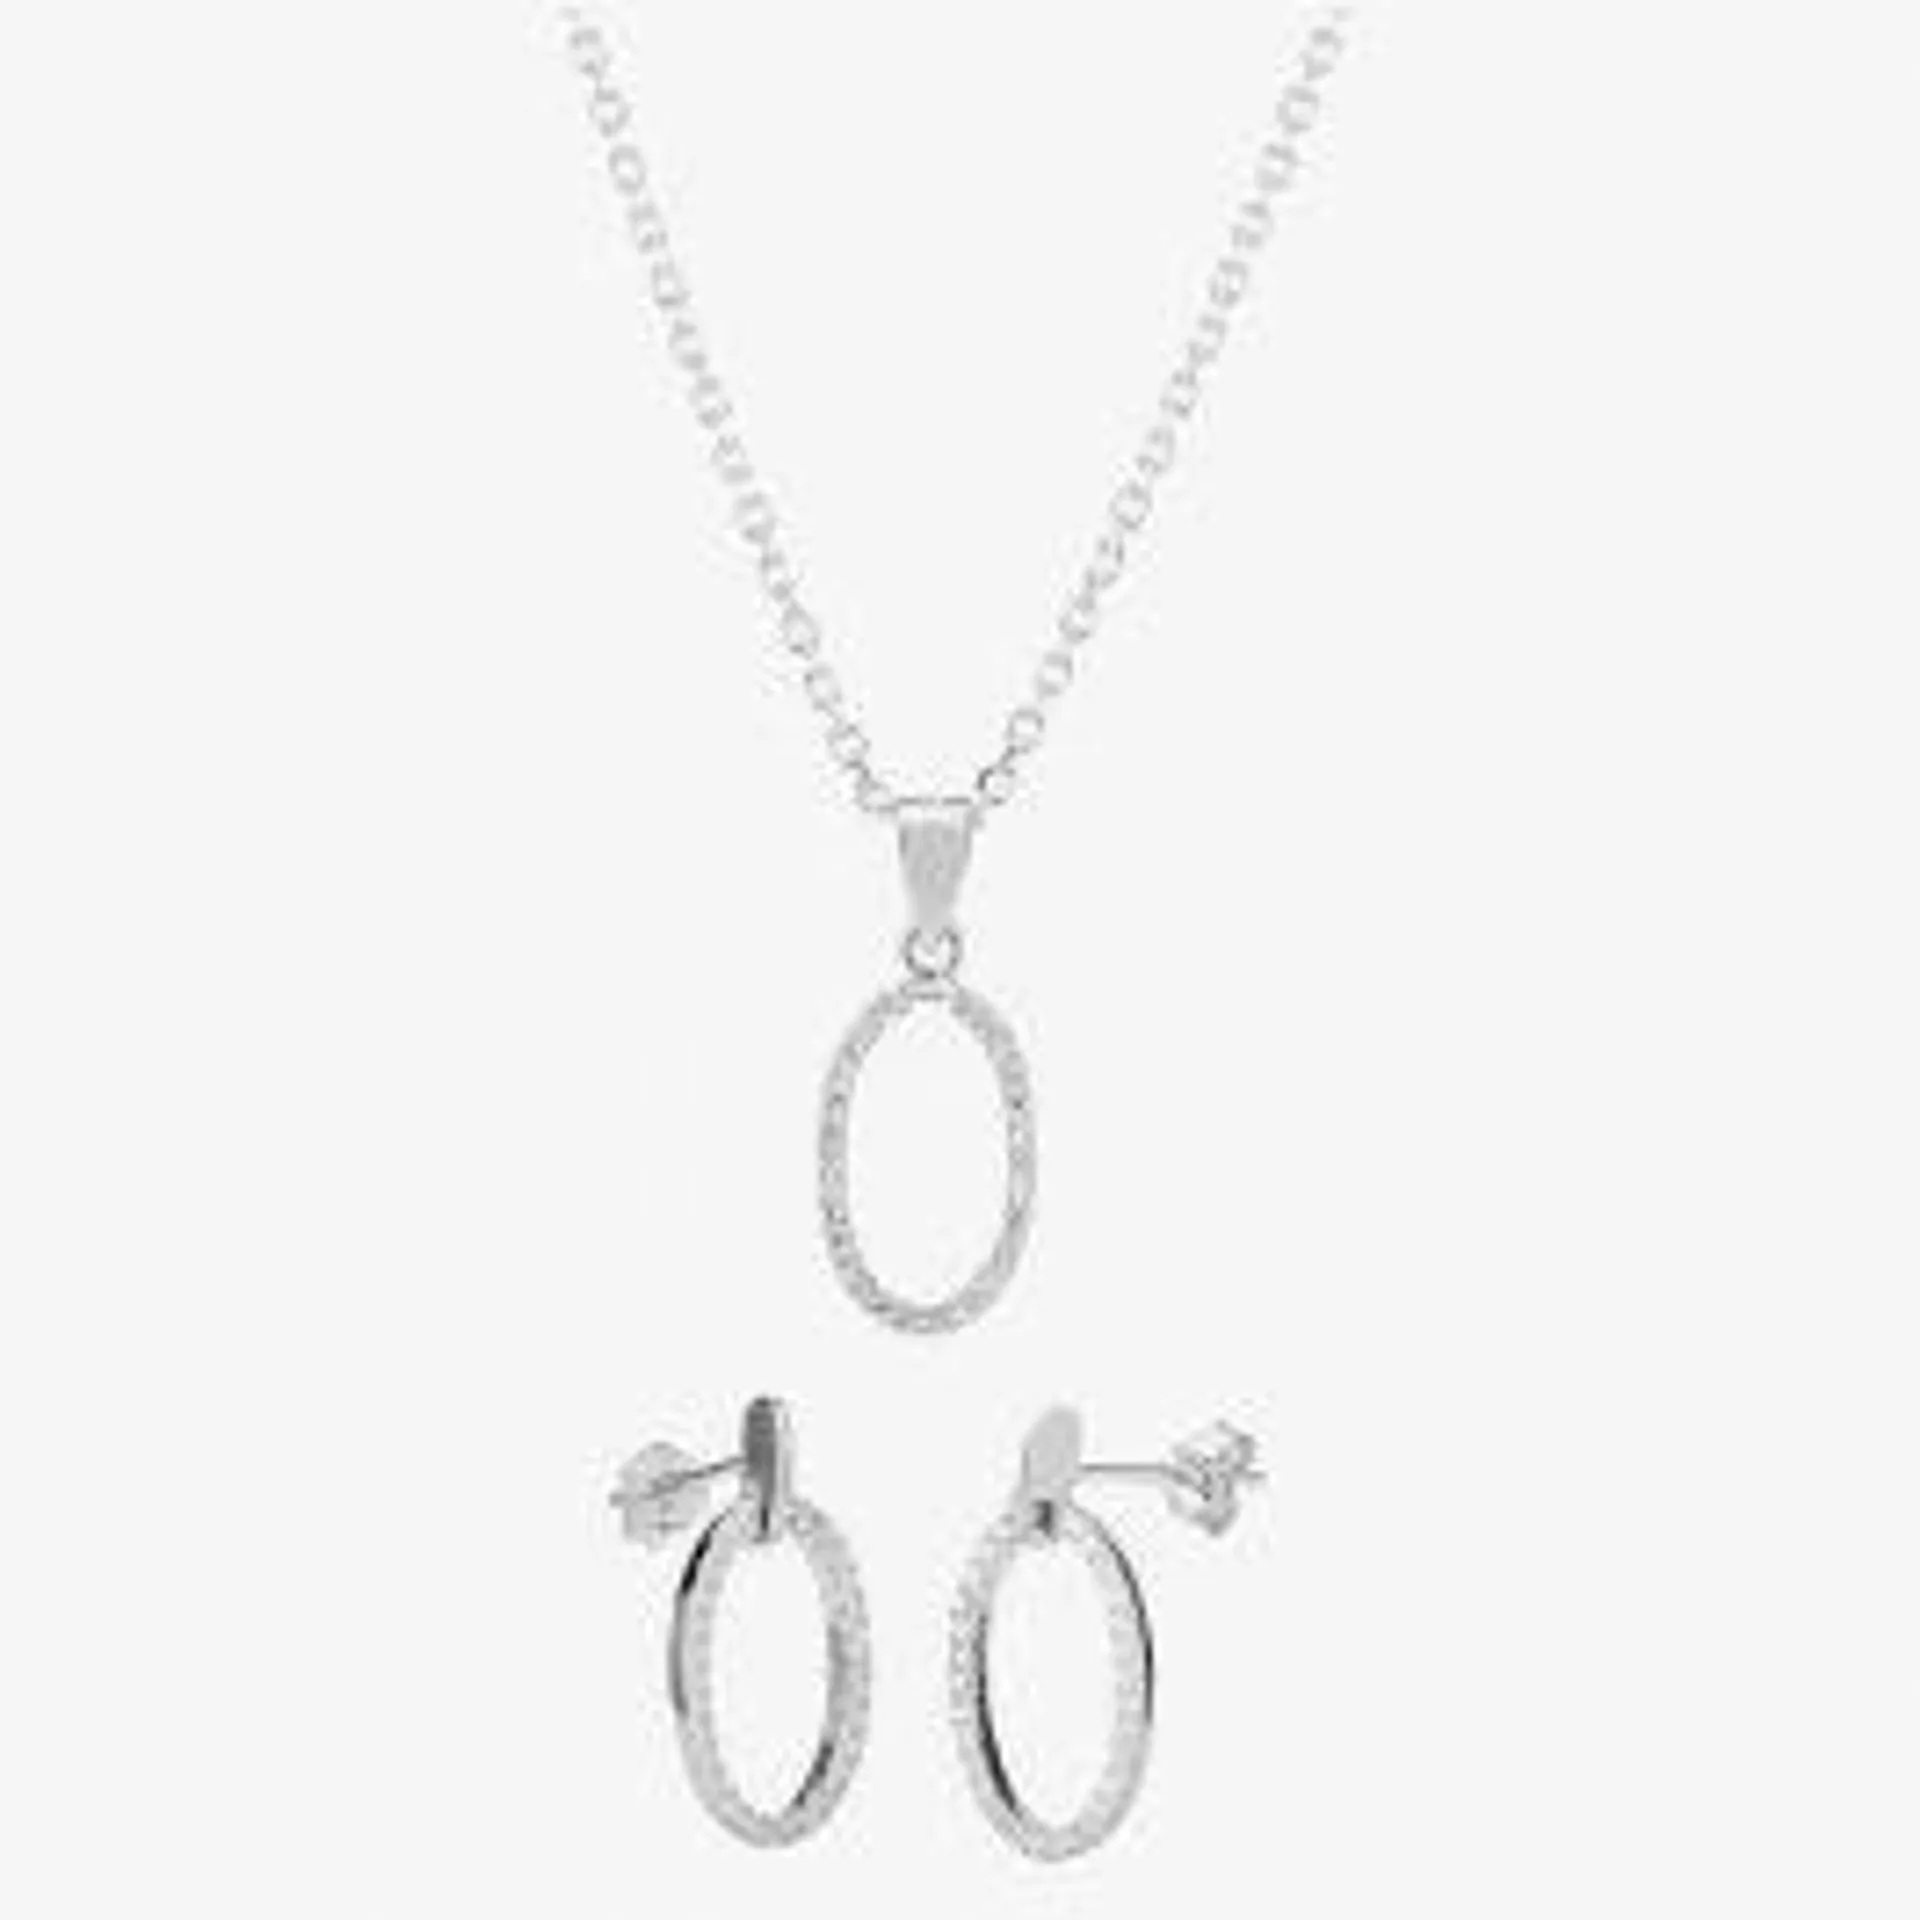 Silver Cubic Zirconia Open Oval Pendant and Dropper Earring Set SET12795